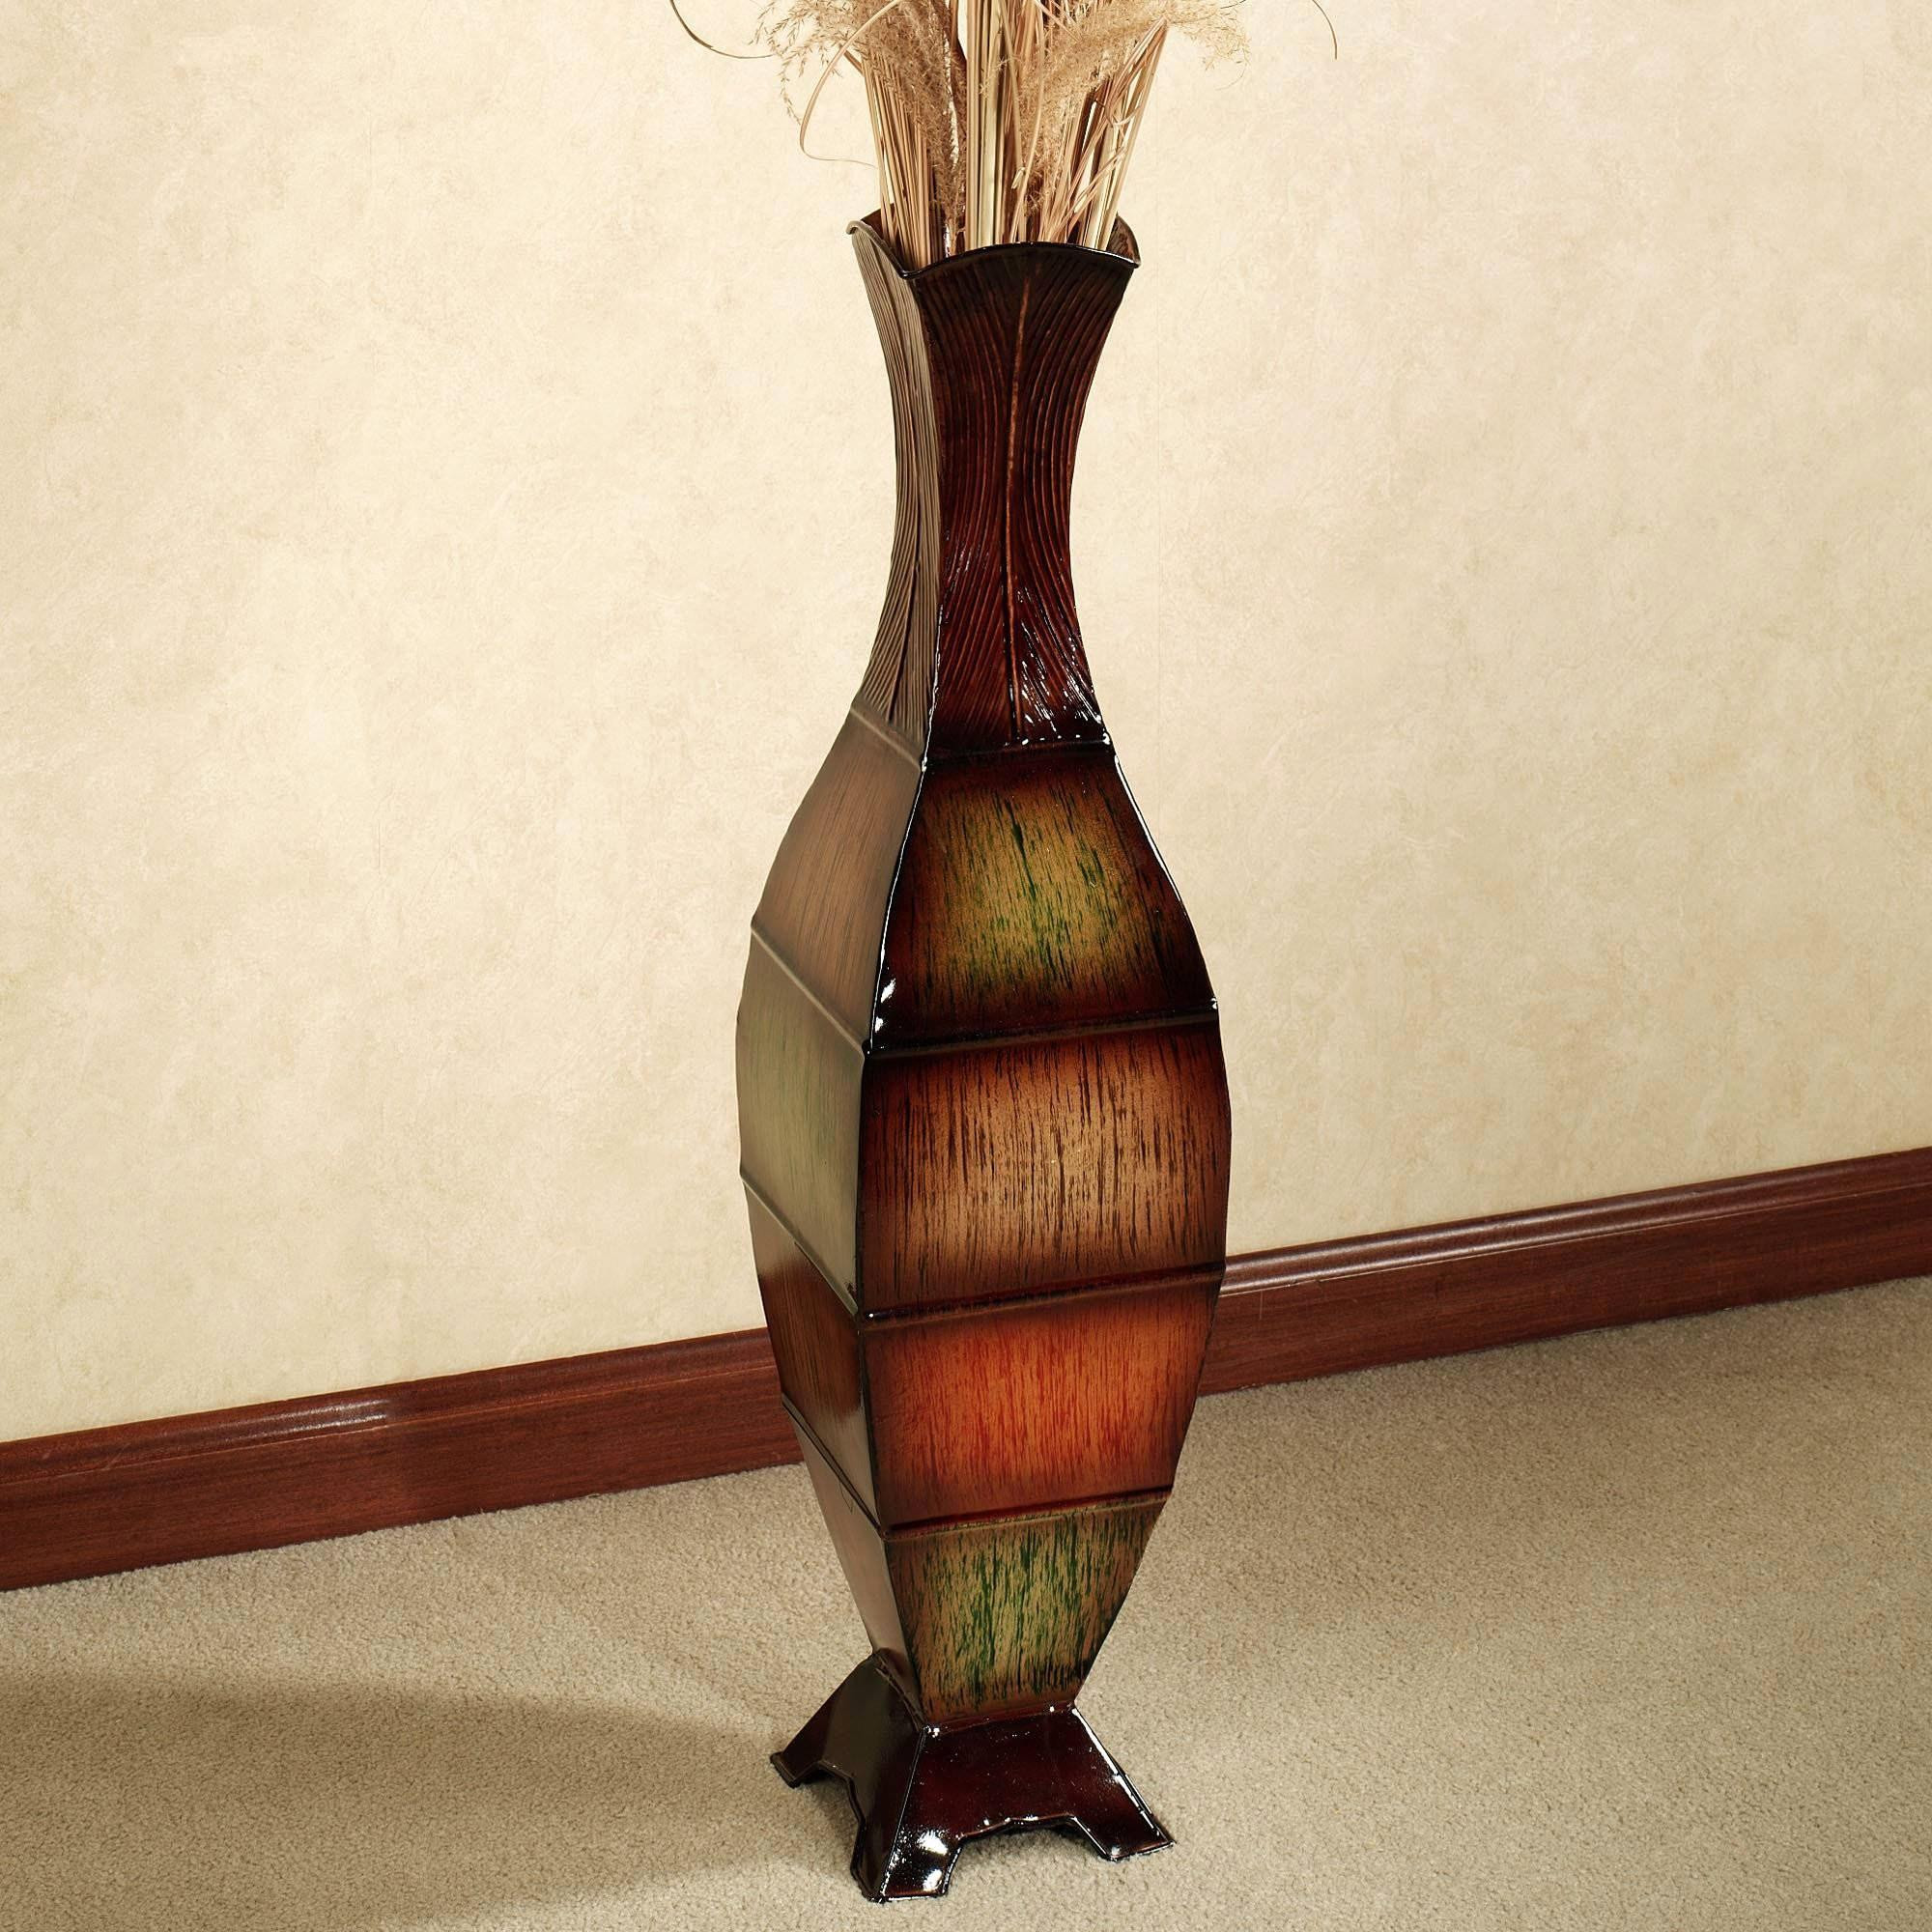 19 Unique Tall Vase Ideas 2024 free download tall vase ideas of living room vases wholesale new h vases big tall i 0d for cheap also within living room vases wholesale new h vases big tall i 0d for cheap also design of